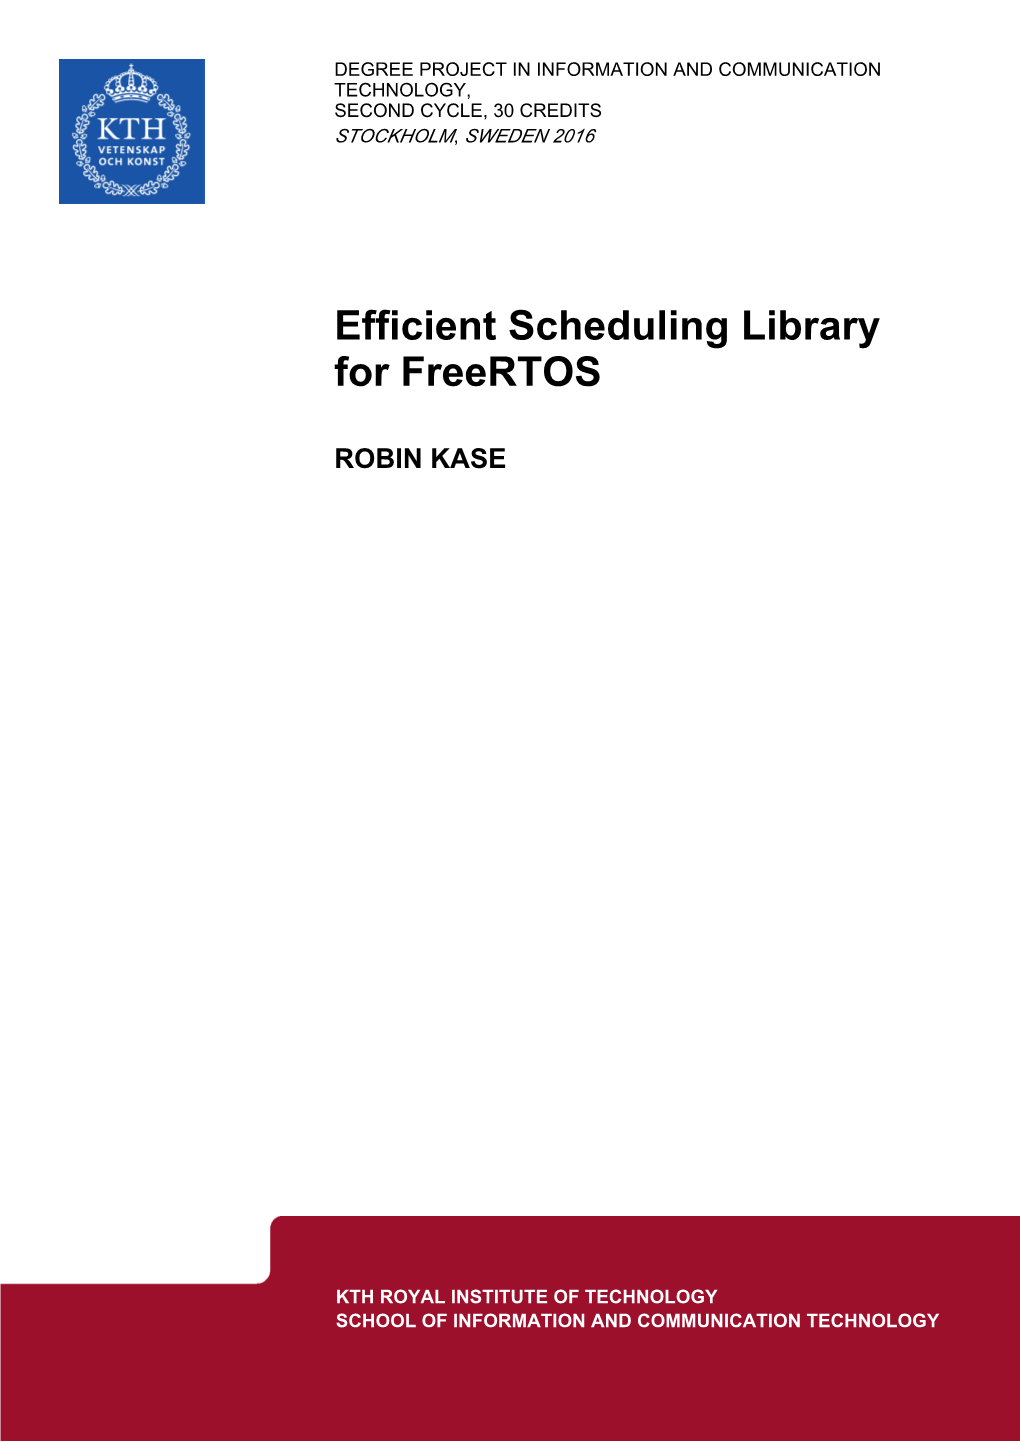 Efficient Scheduling Library for Freertos